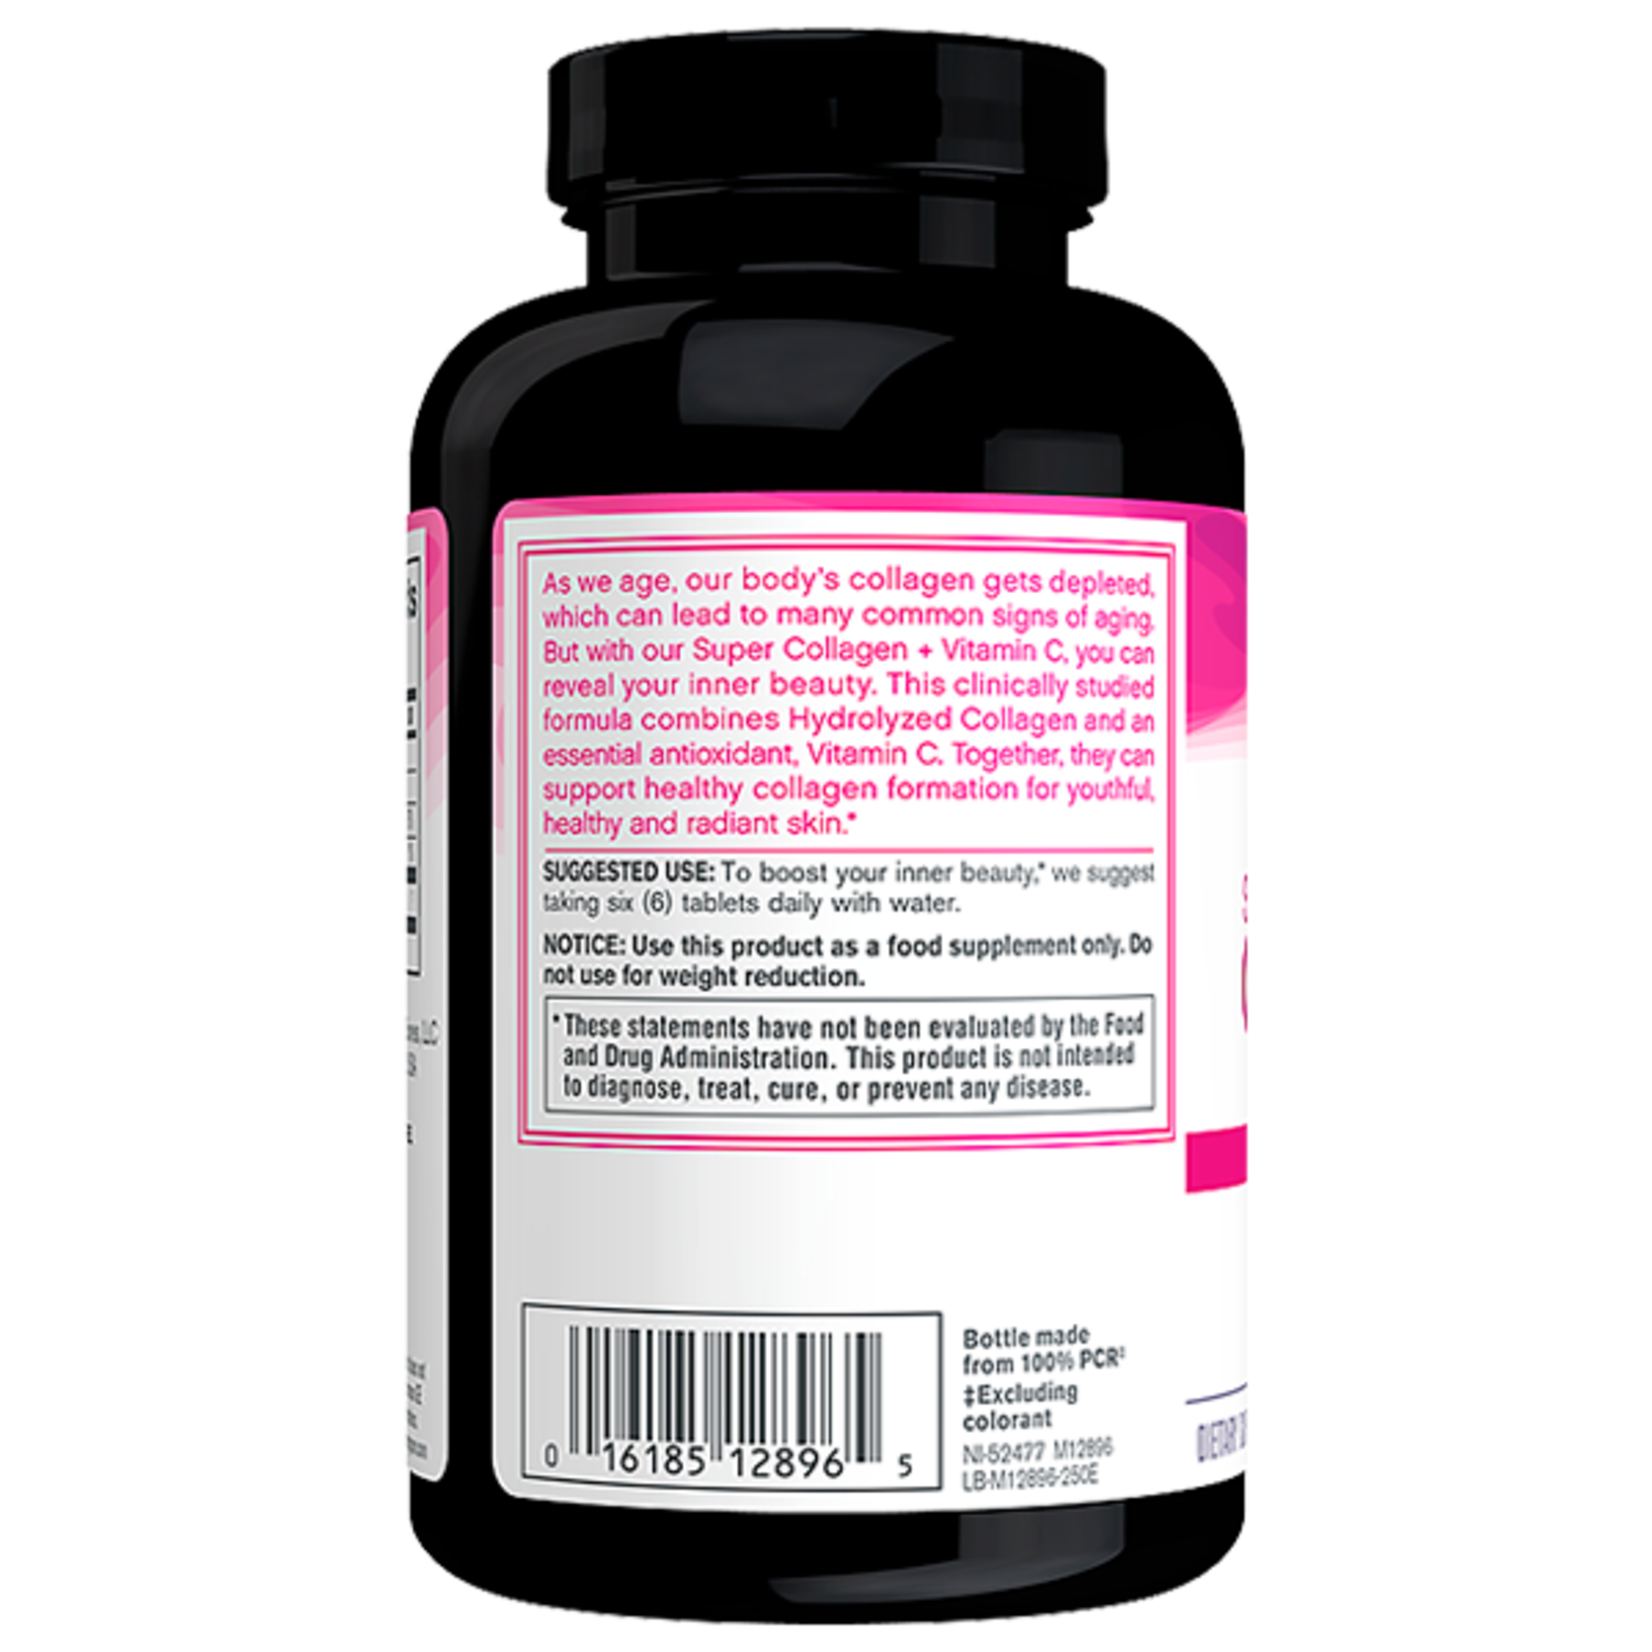 Neocell Neocell - Super Collagen + C - 250 Tablets